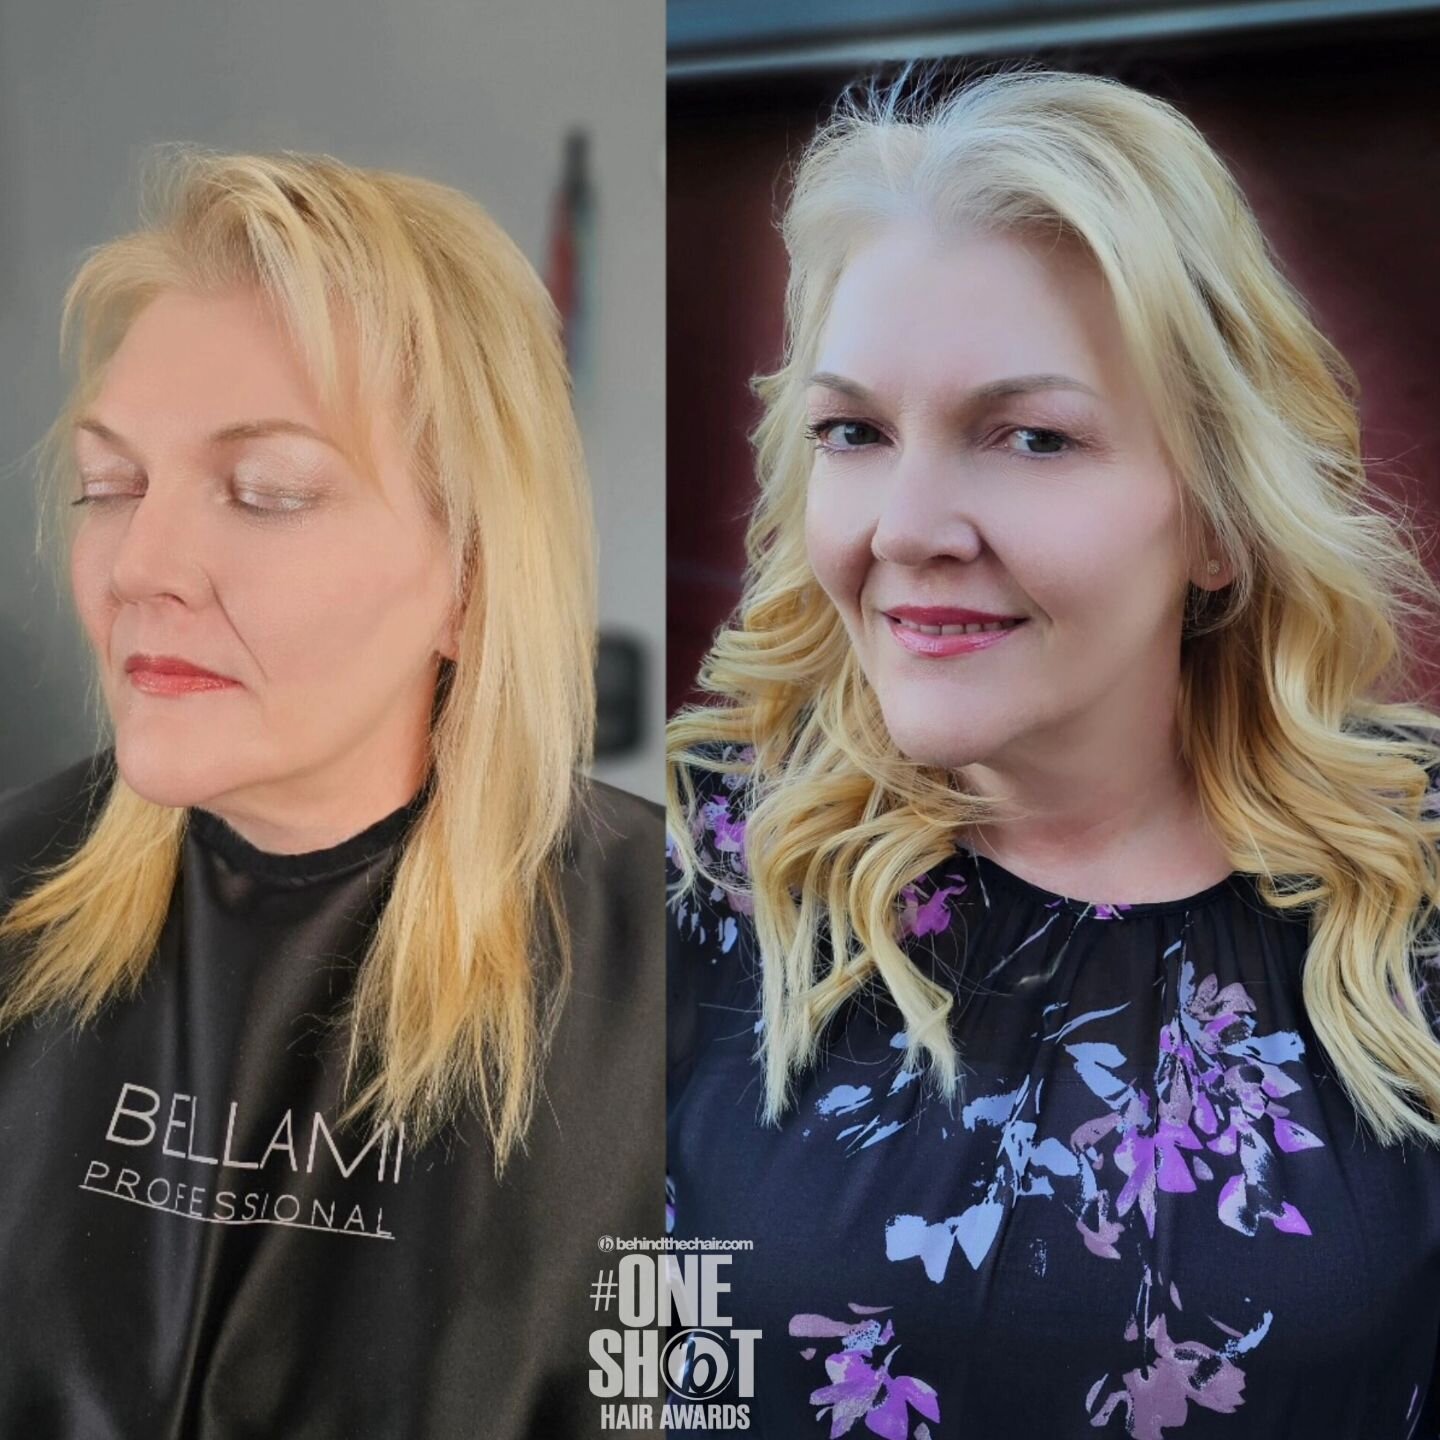 Extensions don't just give you length but can give you fullness and volume too! This beauty has 18-inch Belliam k-tip hair extensions and couldn't love them more! Blonde bombshell! 

@oneshothairawards 
@behindthechair_com 
@bellamihairpro 

#btcones